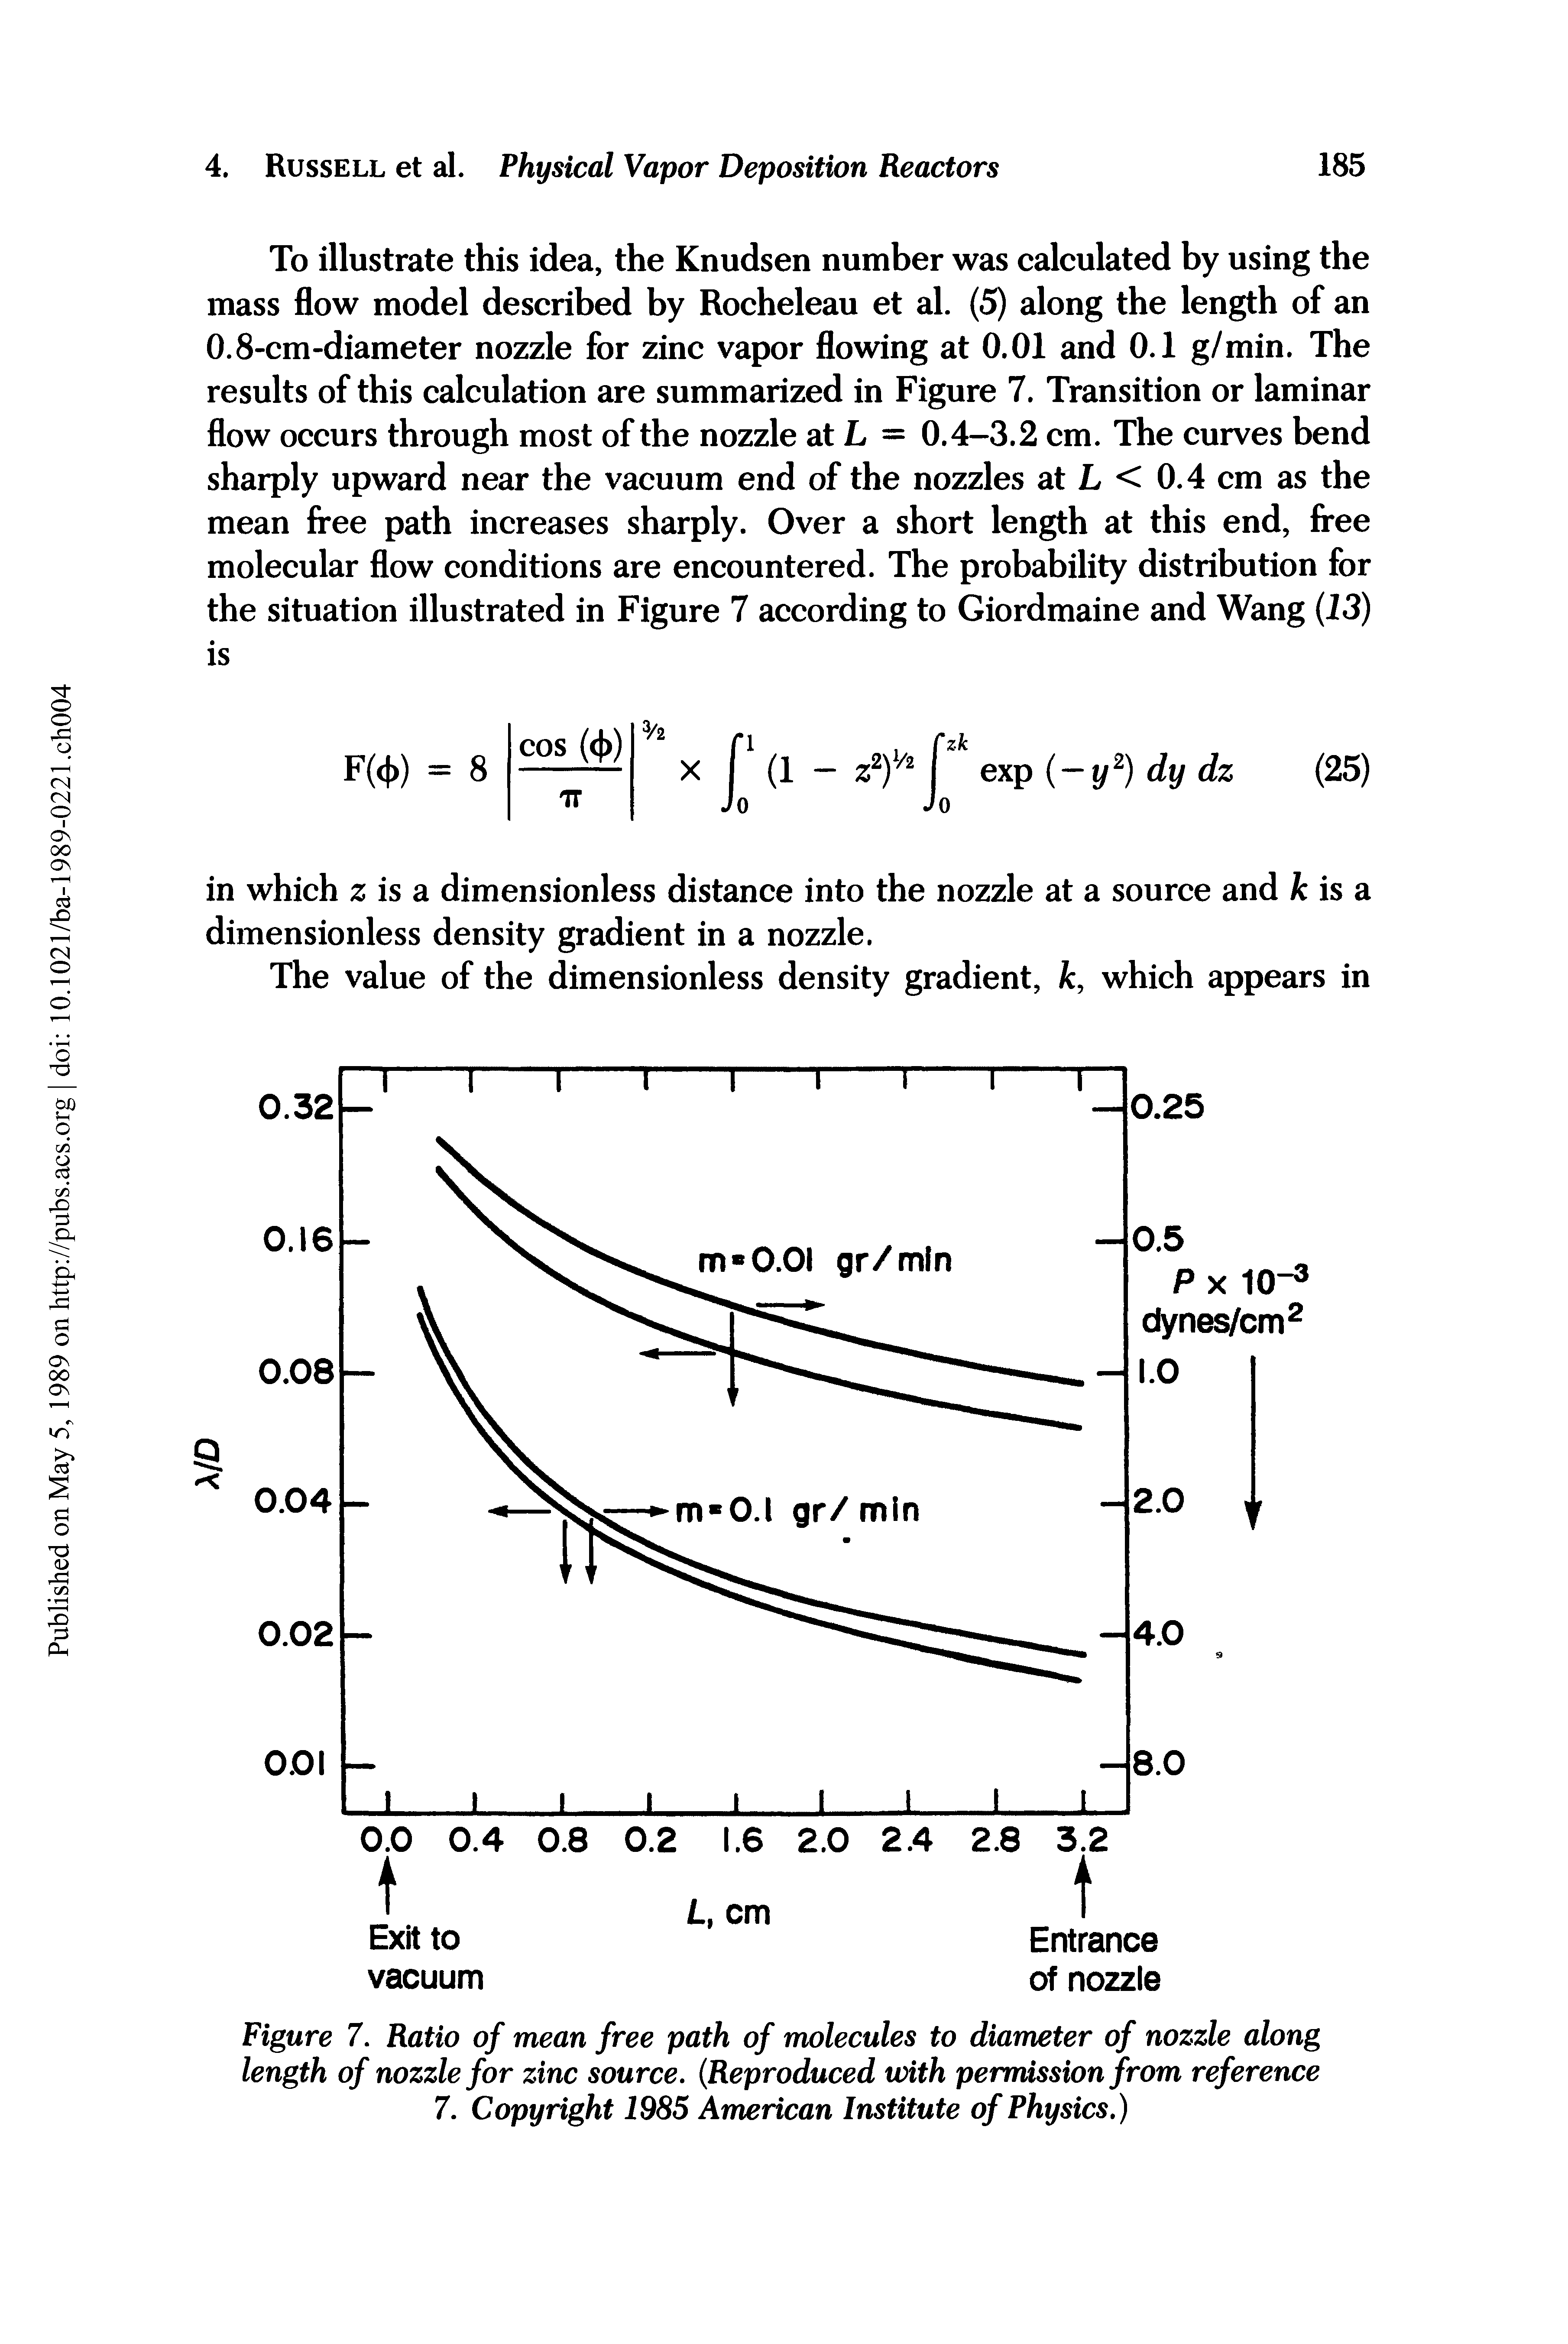 Figure 7. Ratio of mean free path of molecules to diameter of nozzle along length of nozzle for zinc source. (Reproduced with permission from reference 7. Copyright 1985 American Institute of Physics.)...